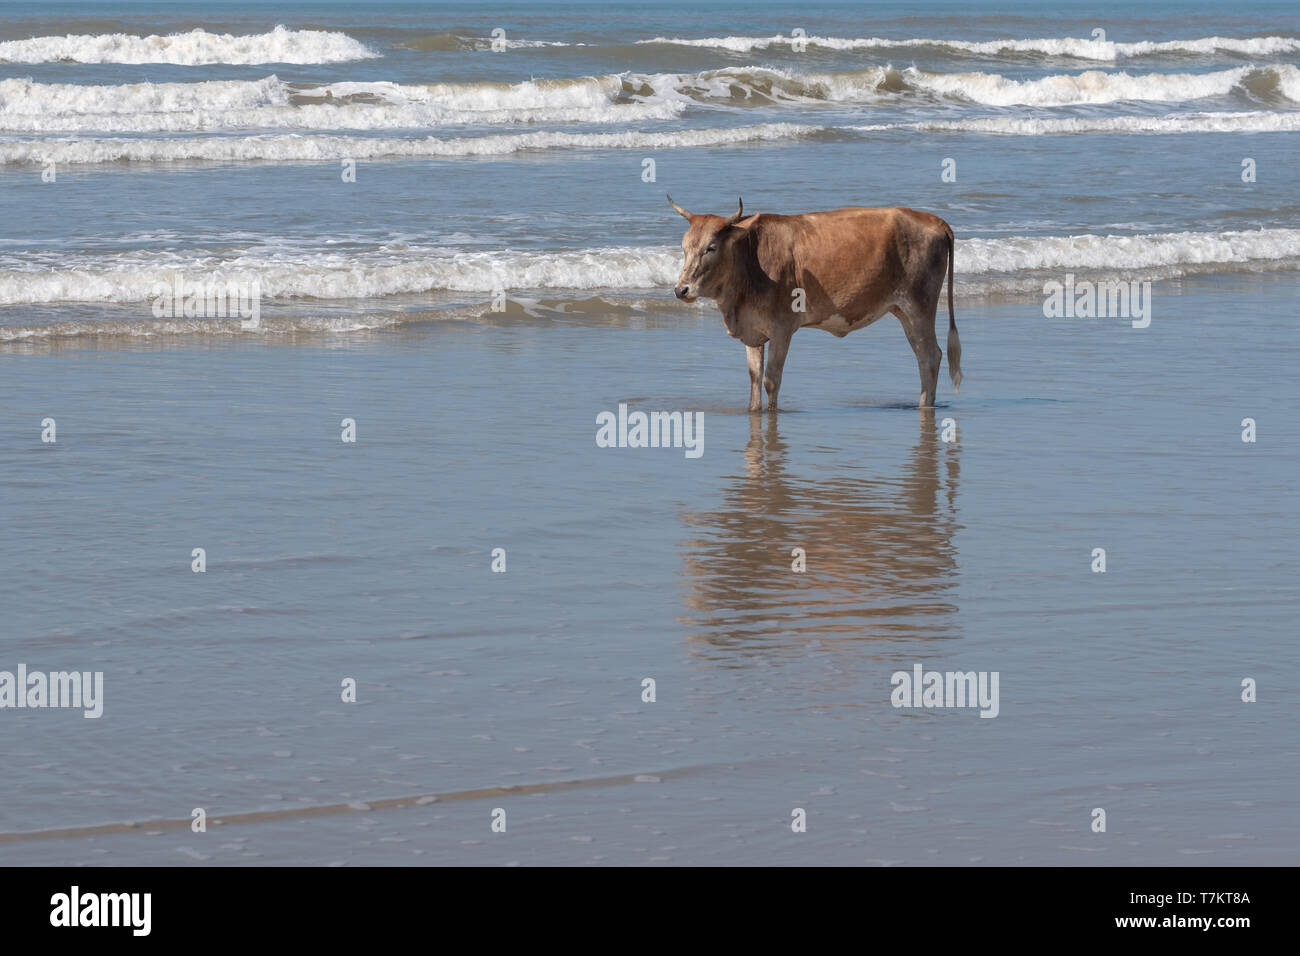 Brown Nguni cow stands on the sand at Second Beach, Port St Johns on the Wild Coast in Transkei, South Africa. Stock Photo